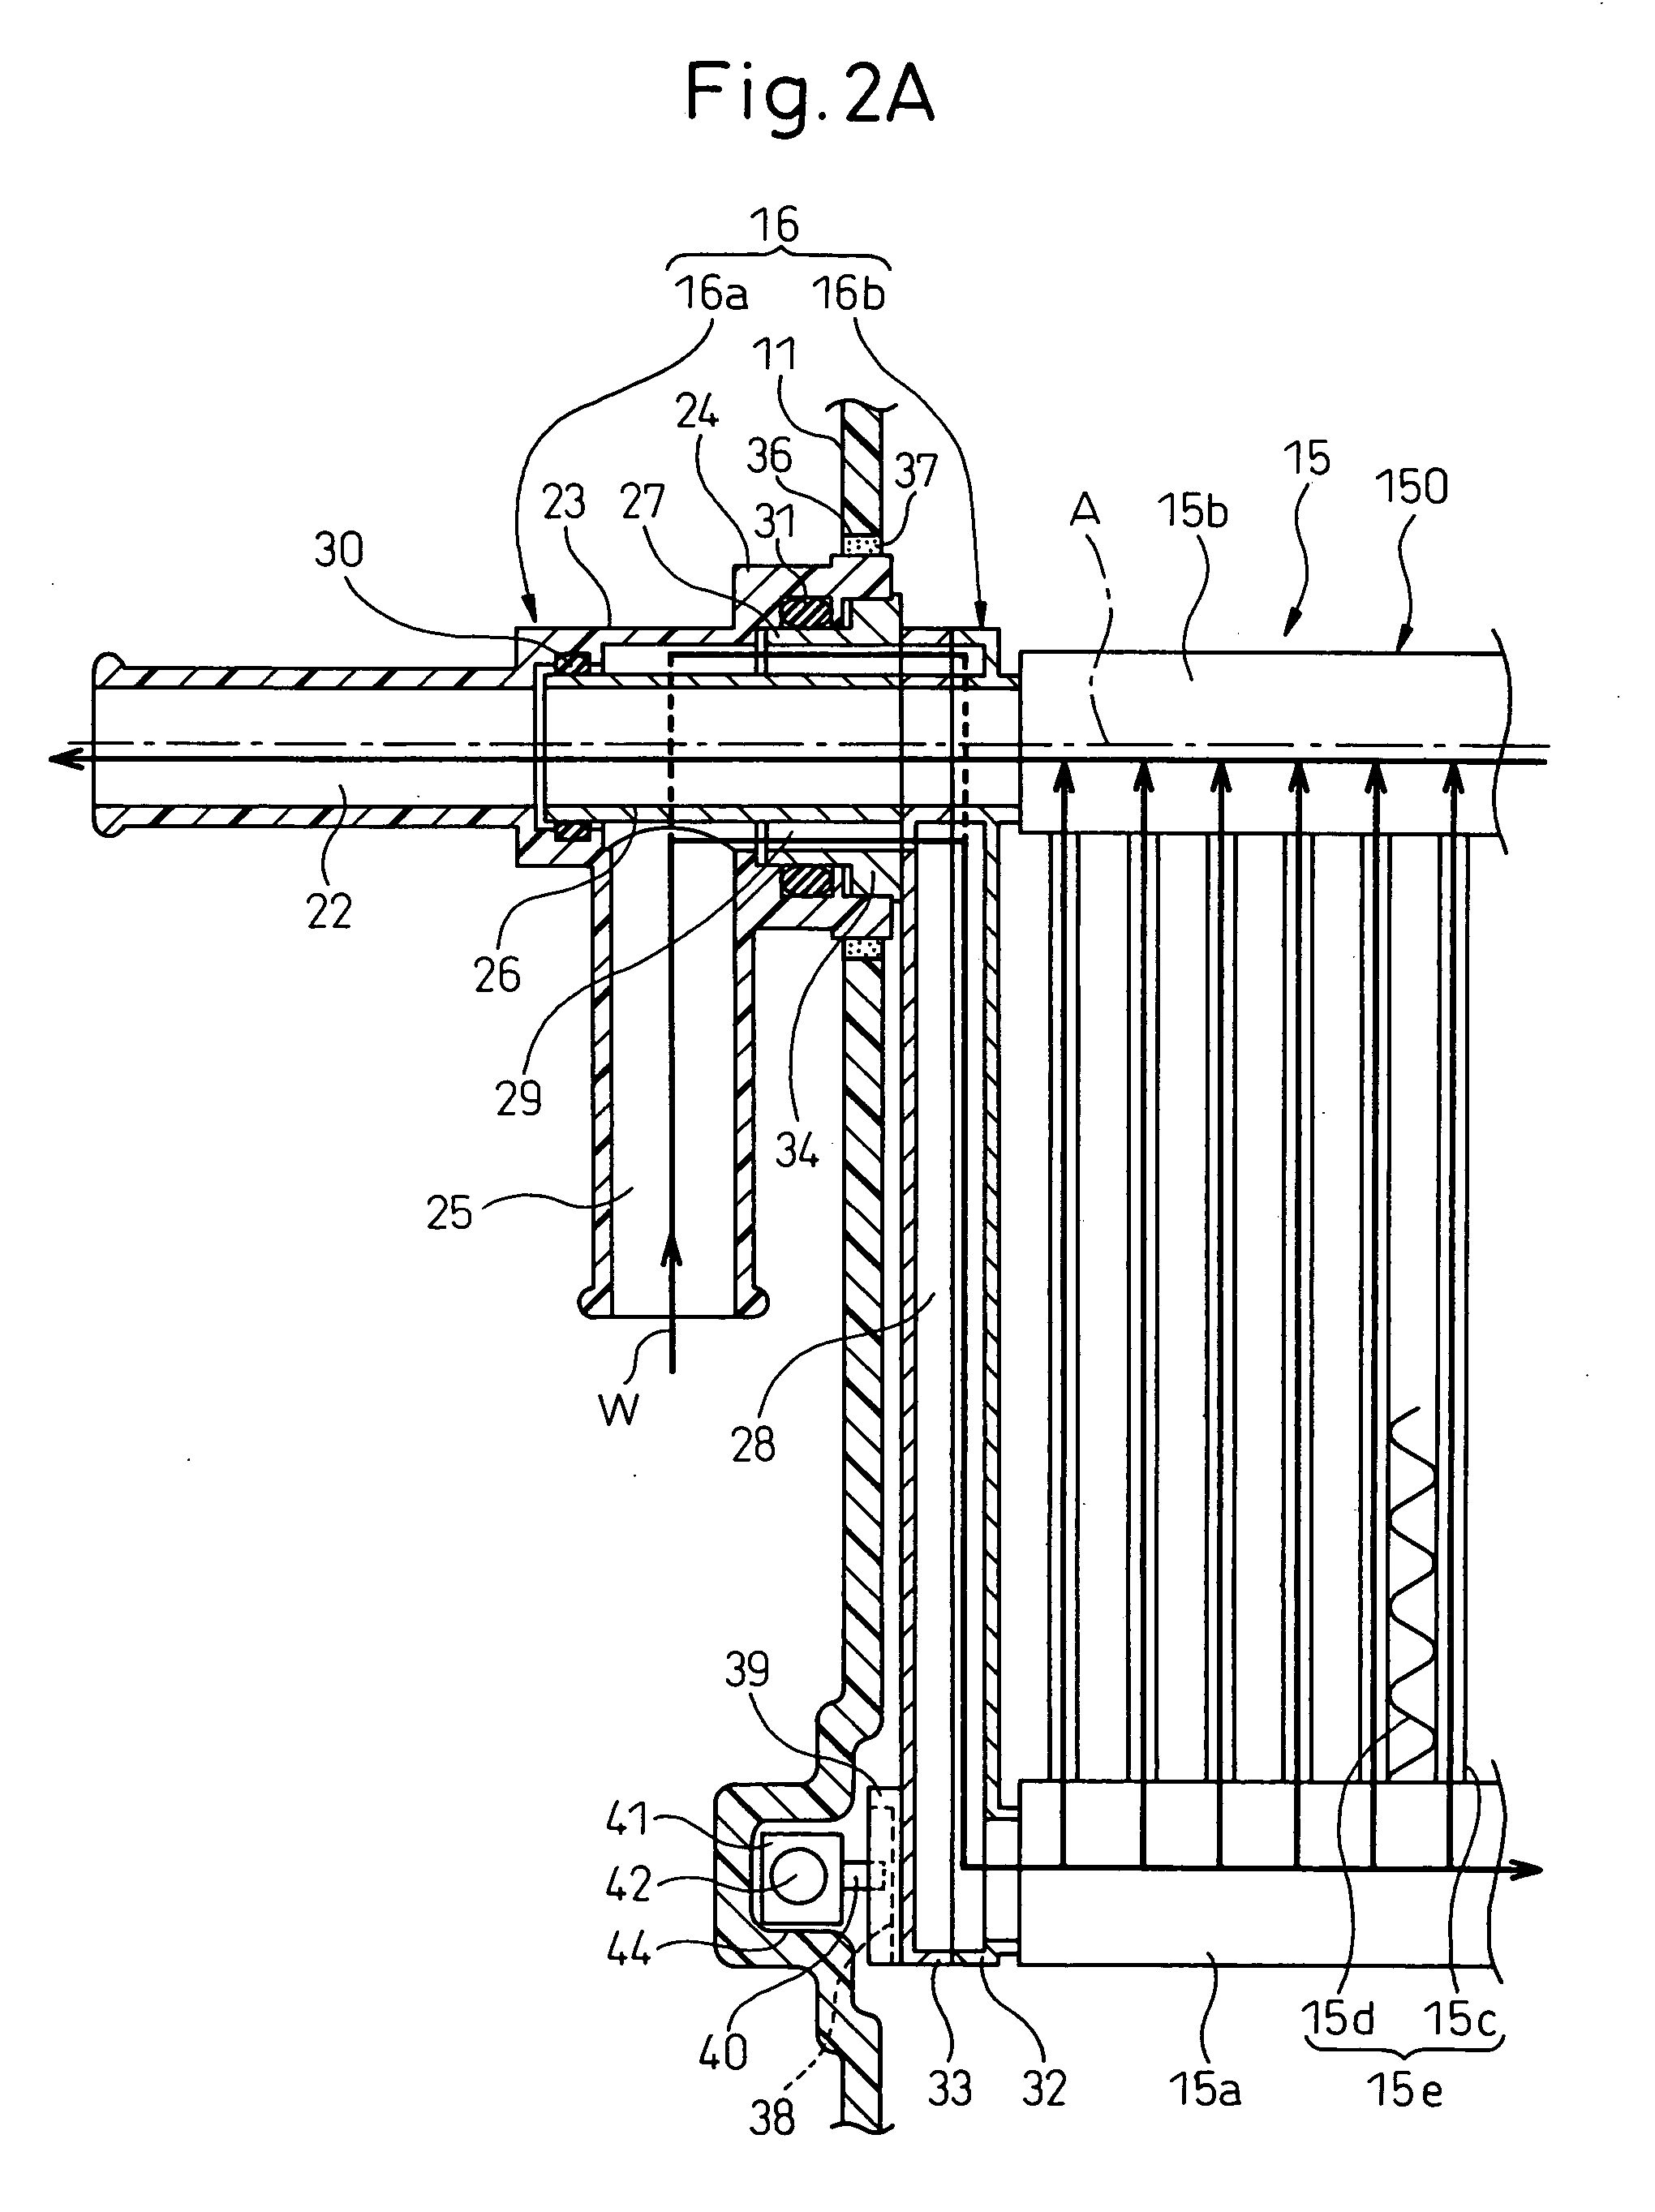 Heat exchanger for air conditioner